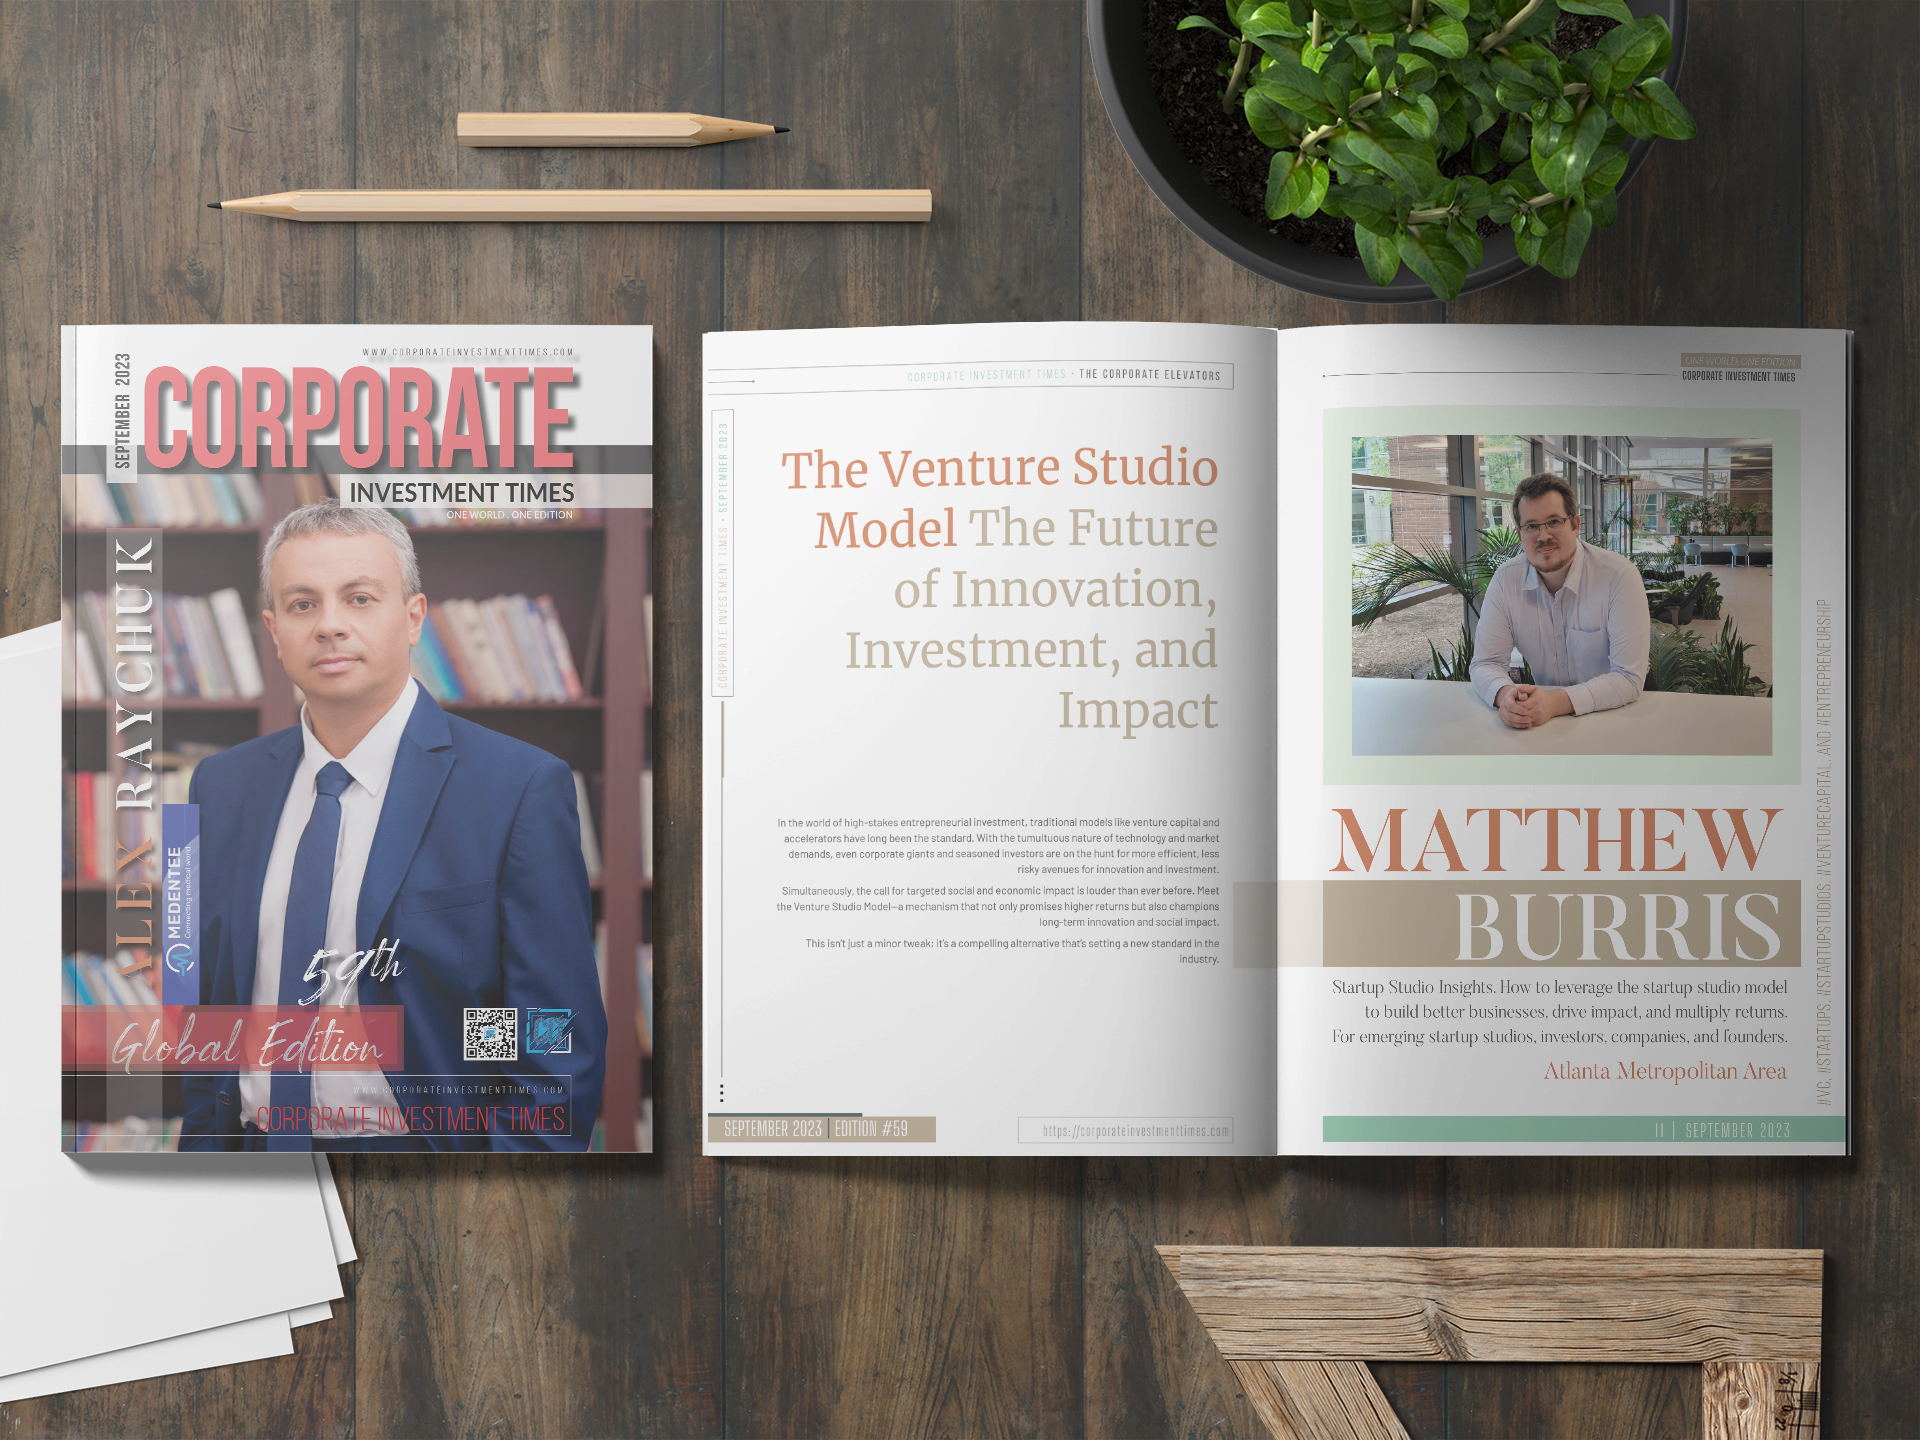 The Venture Studio Model The Future of Innovation, Investment, and Impact - MATTHEW BURRIS